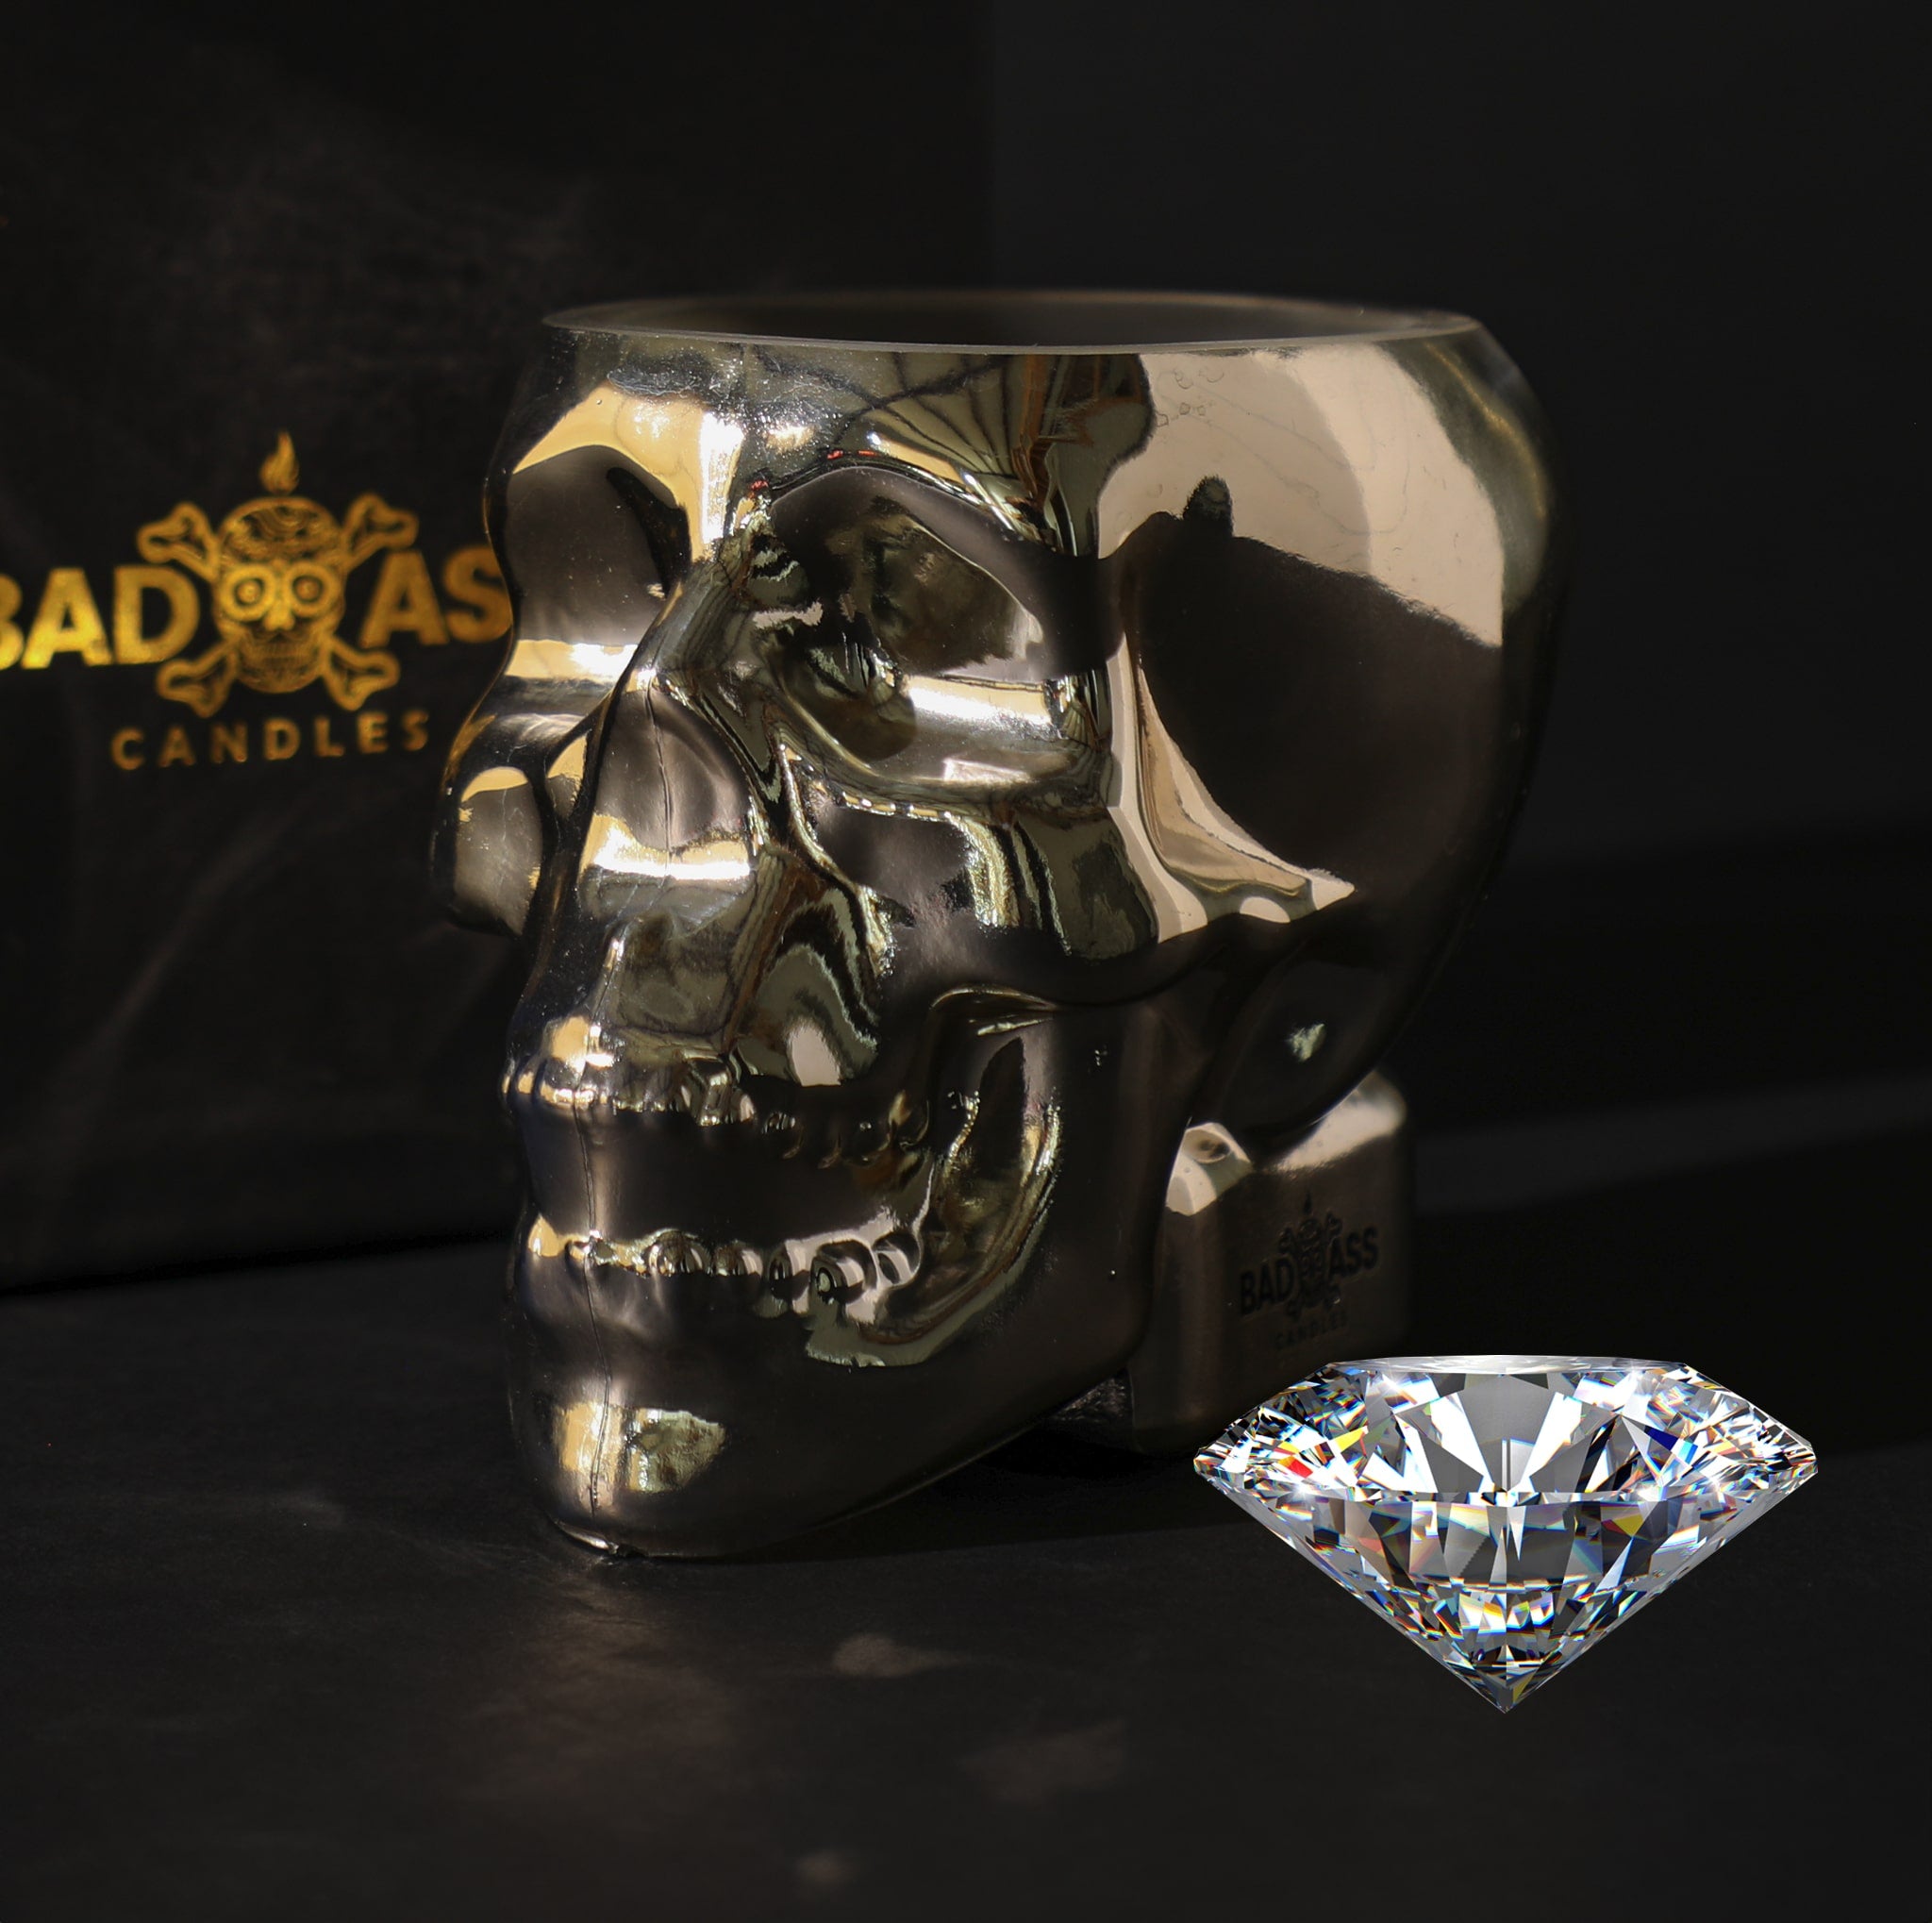 The Gold Skull Diamond Candle by Badass Candles